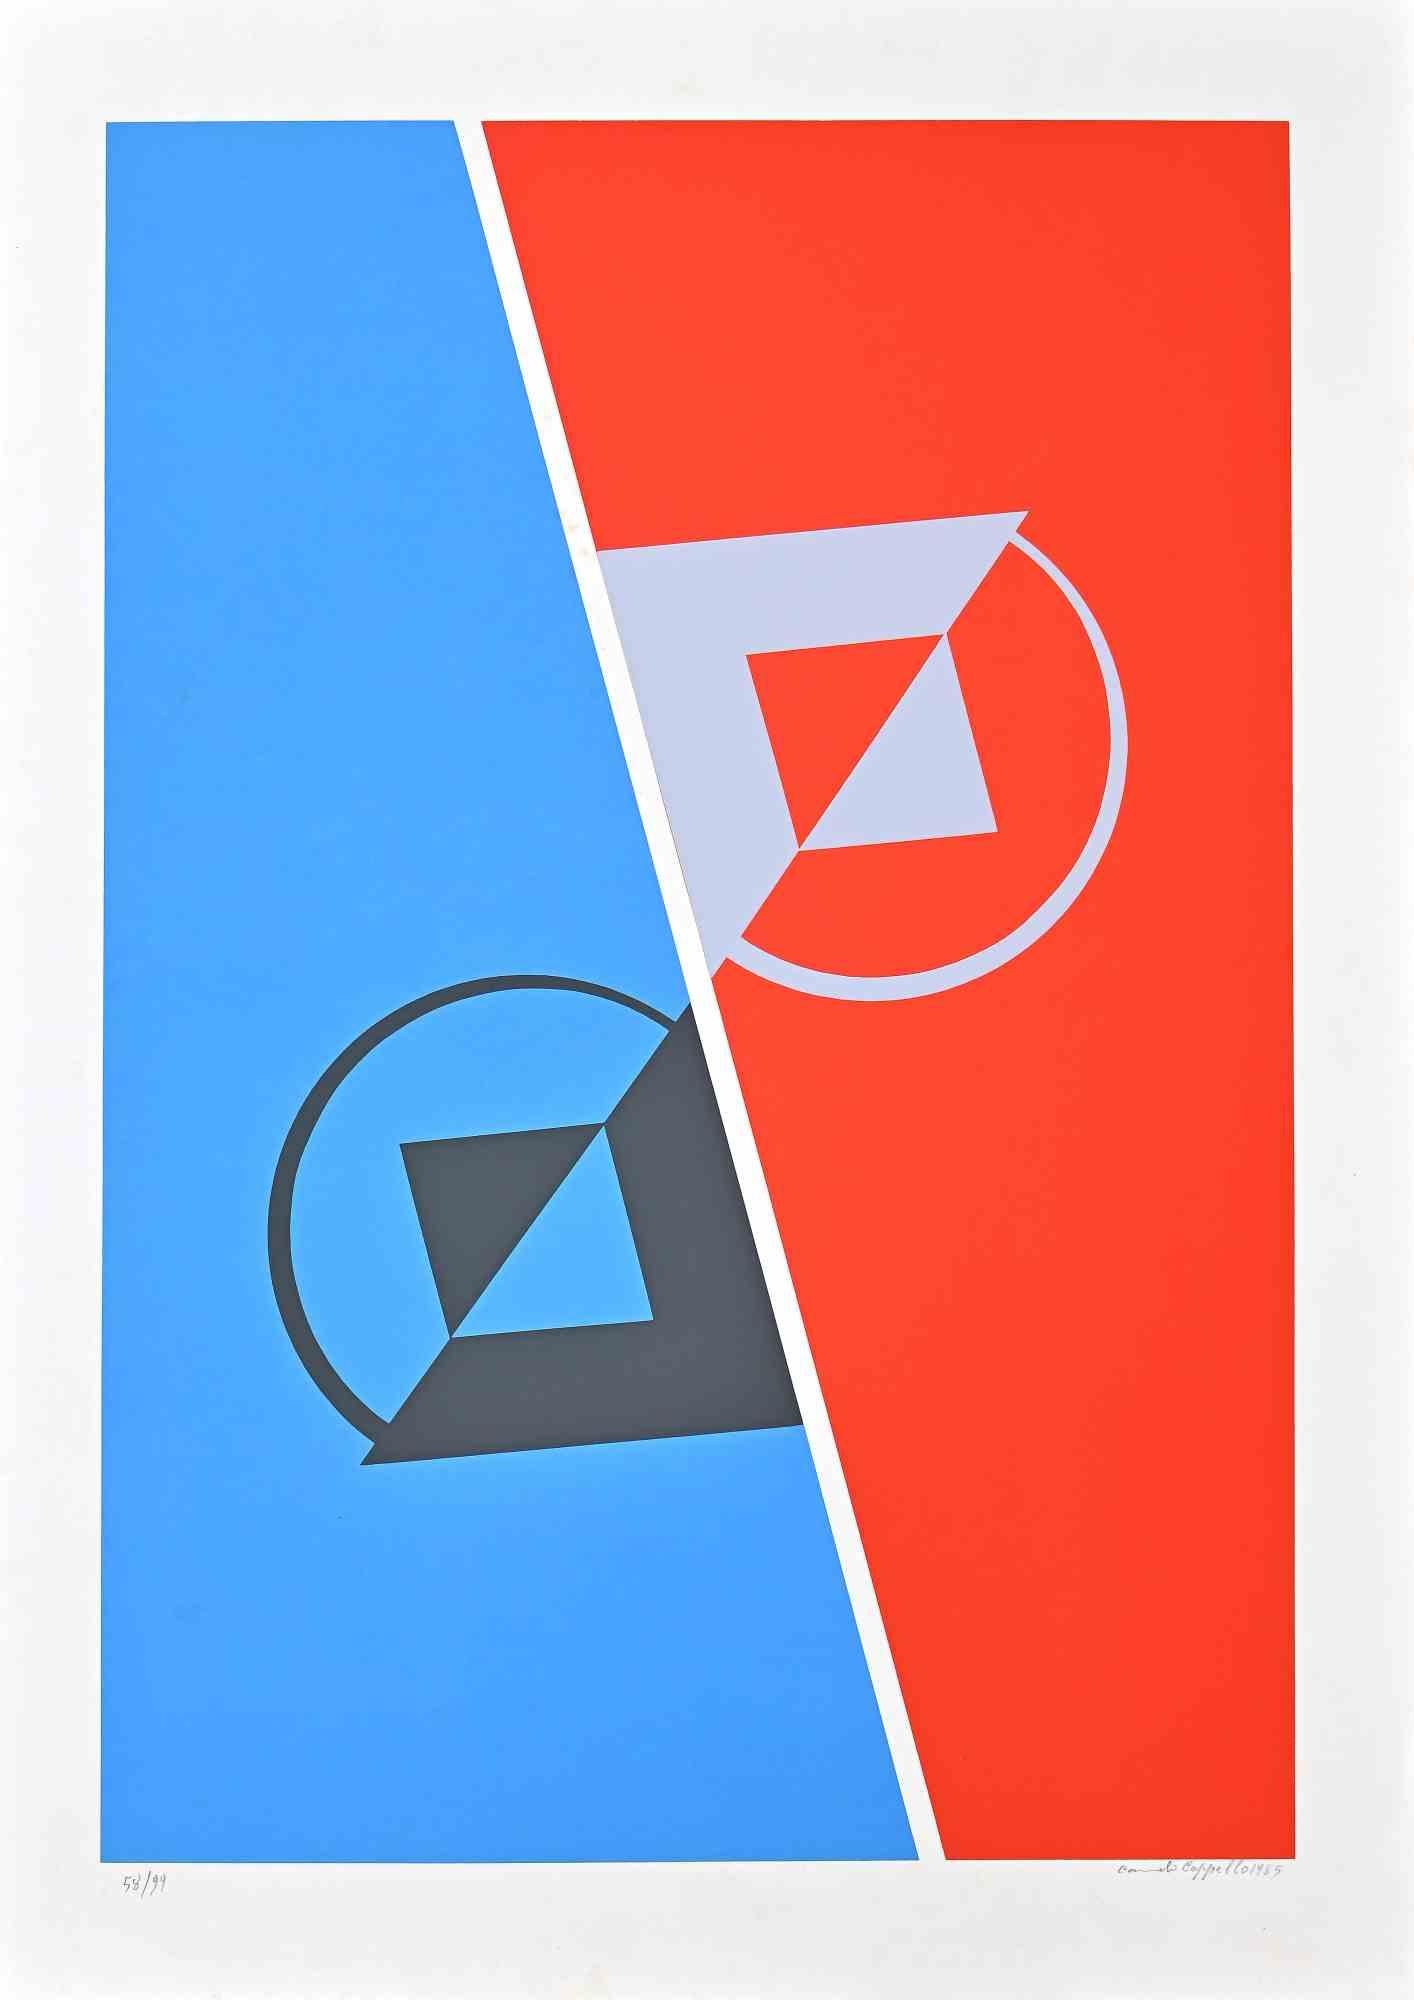 Composition is an original artwork realized by Carmelo Cappello in 1985.

Colored screen print on paper.

The print is hand-signed and dated in pencil on the lower right. Numbered on the lower left. Edition 58/99.

Good conditions.

This colorful